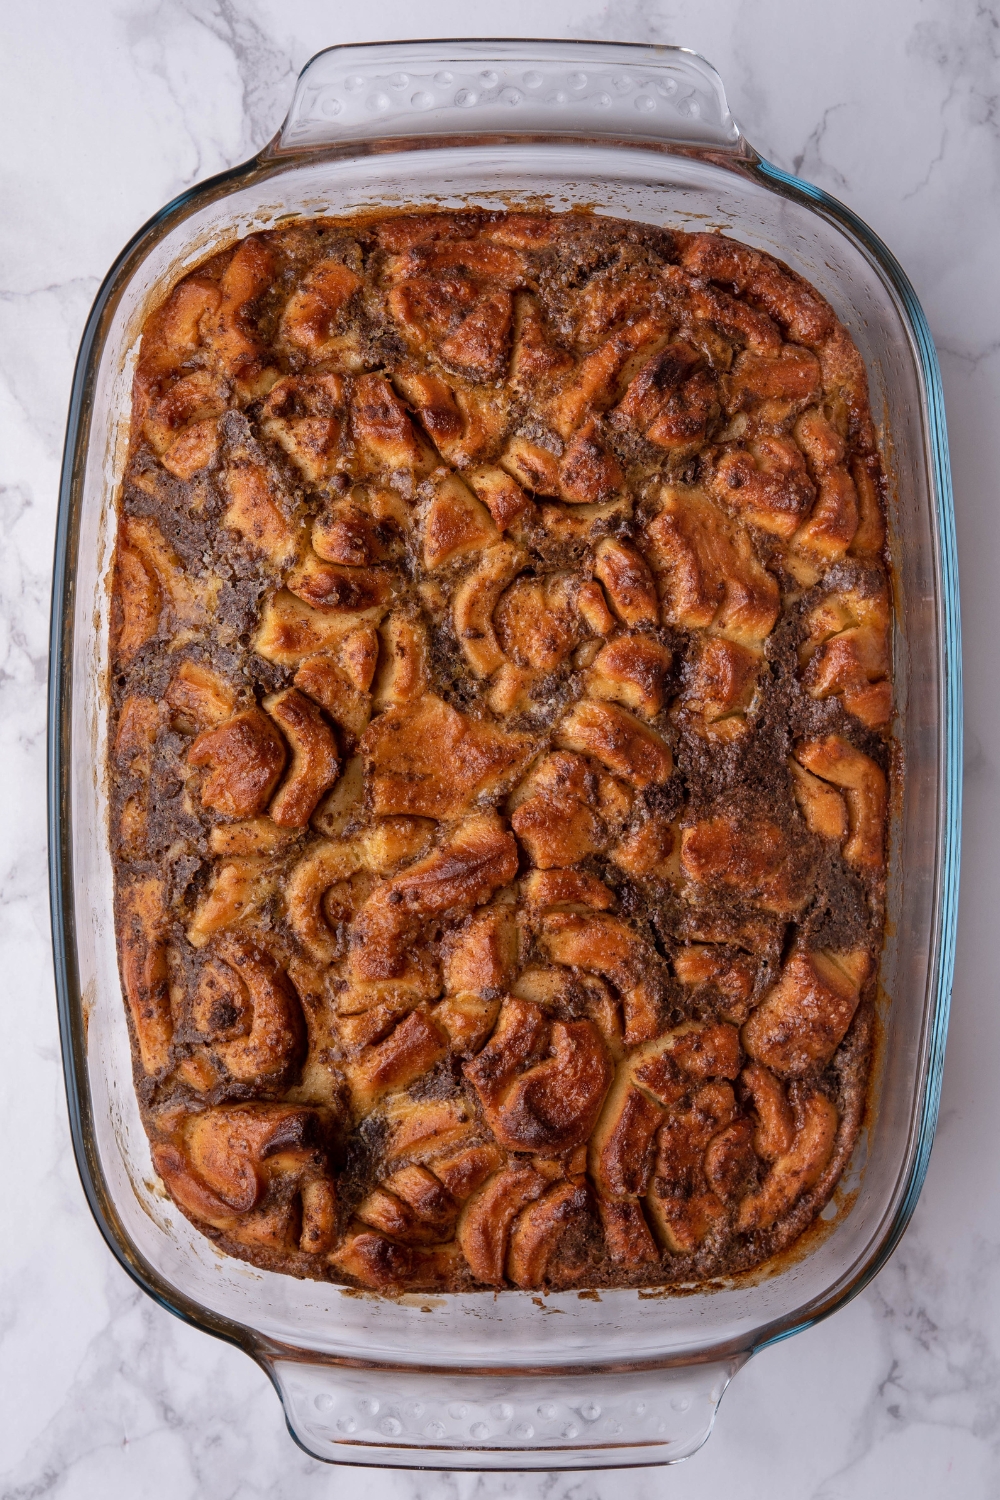 Baked cinnamon roll pieces in a casserole dish.